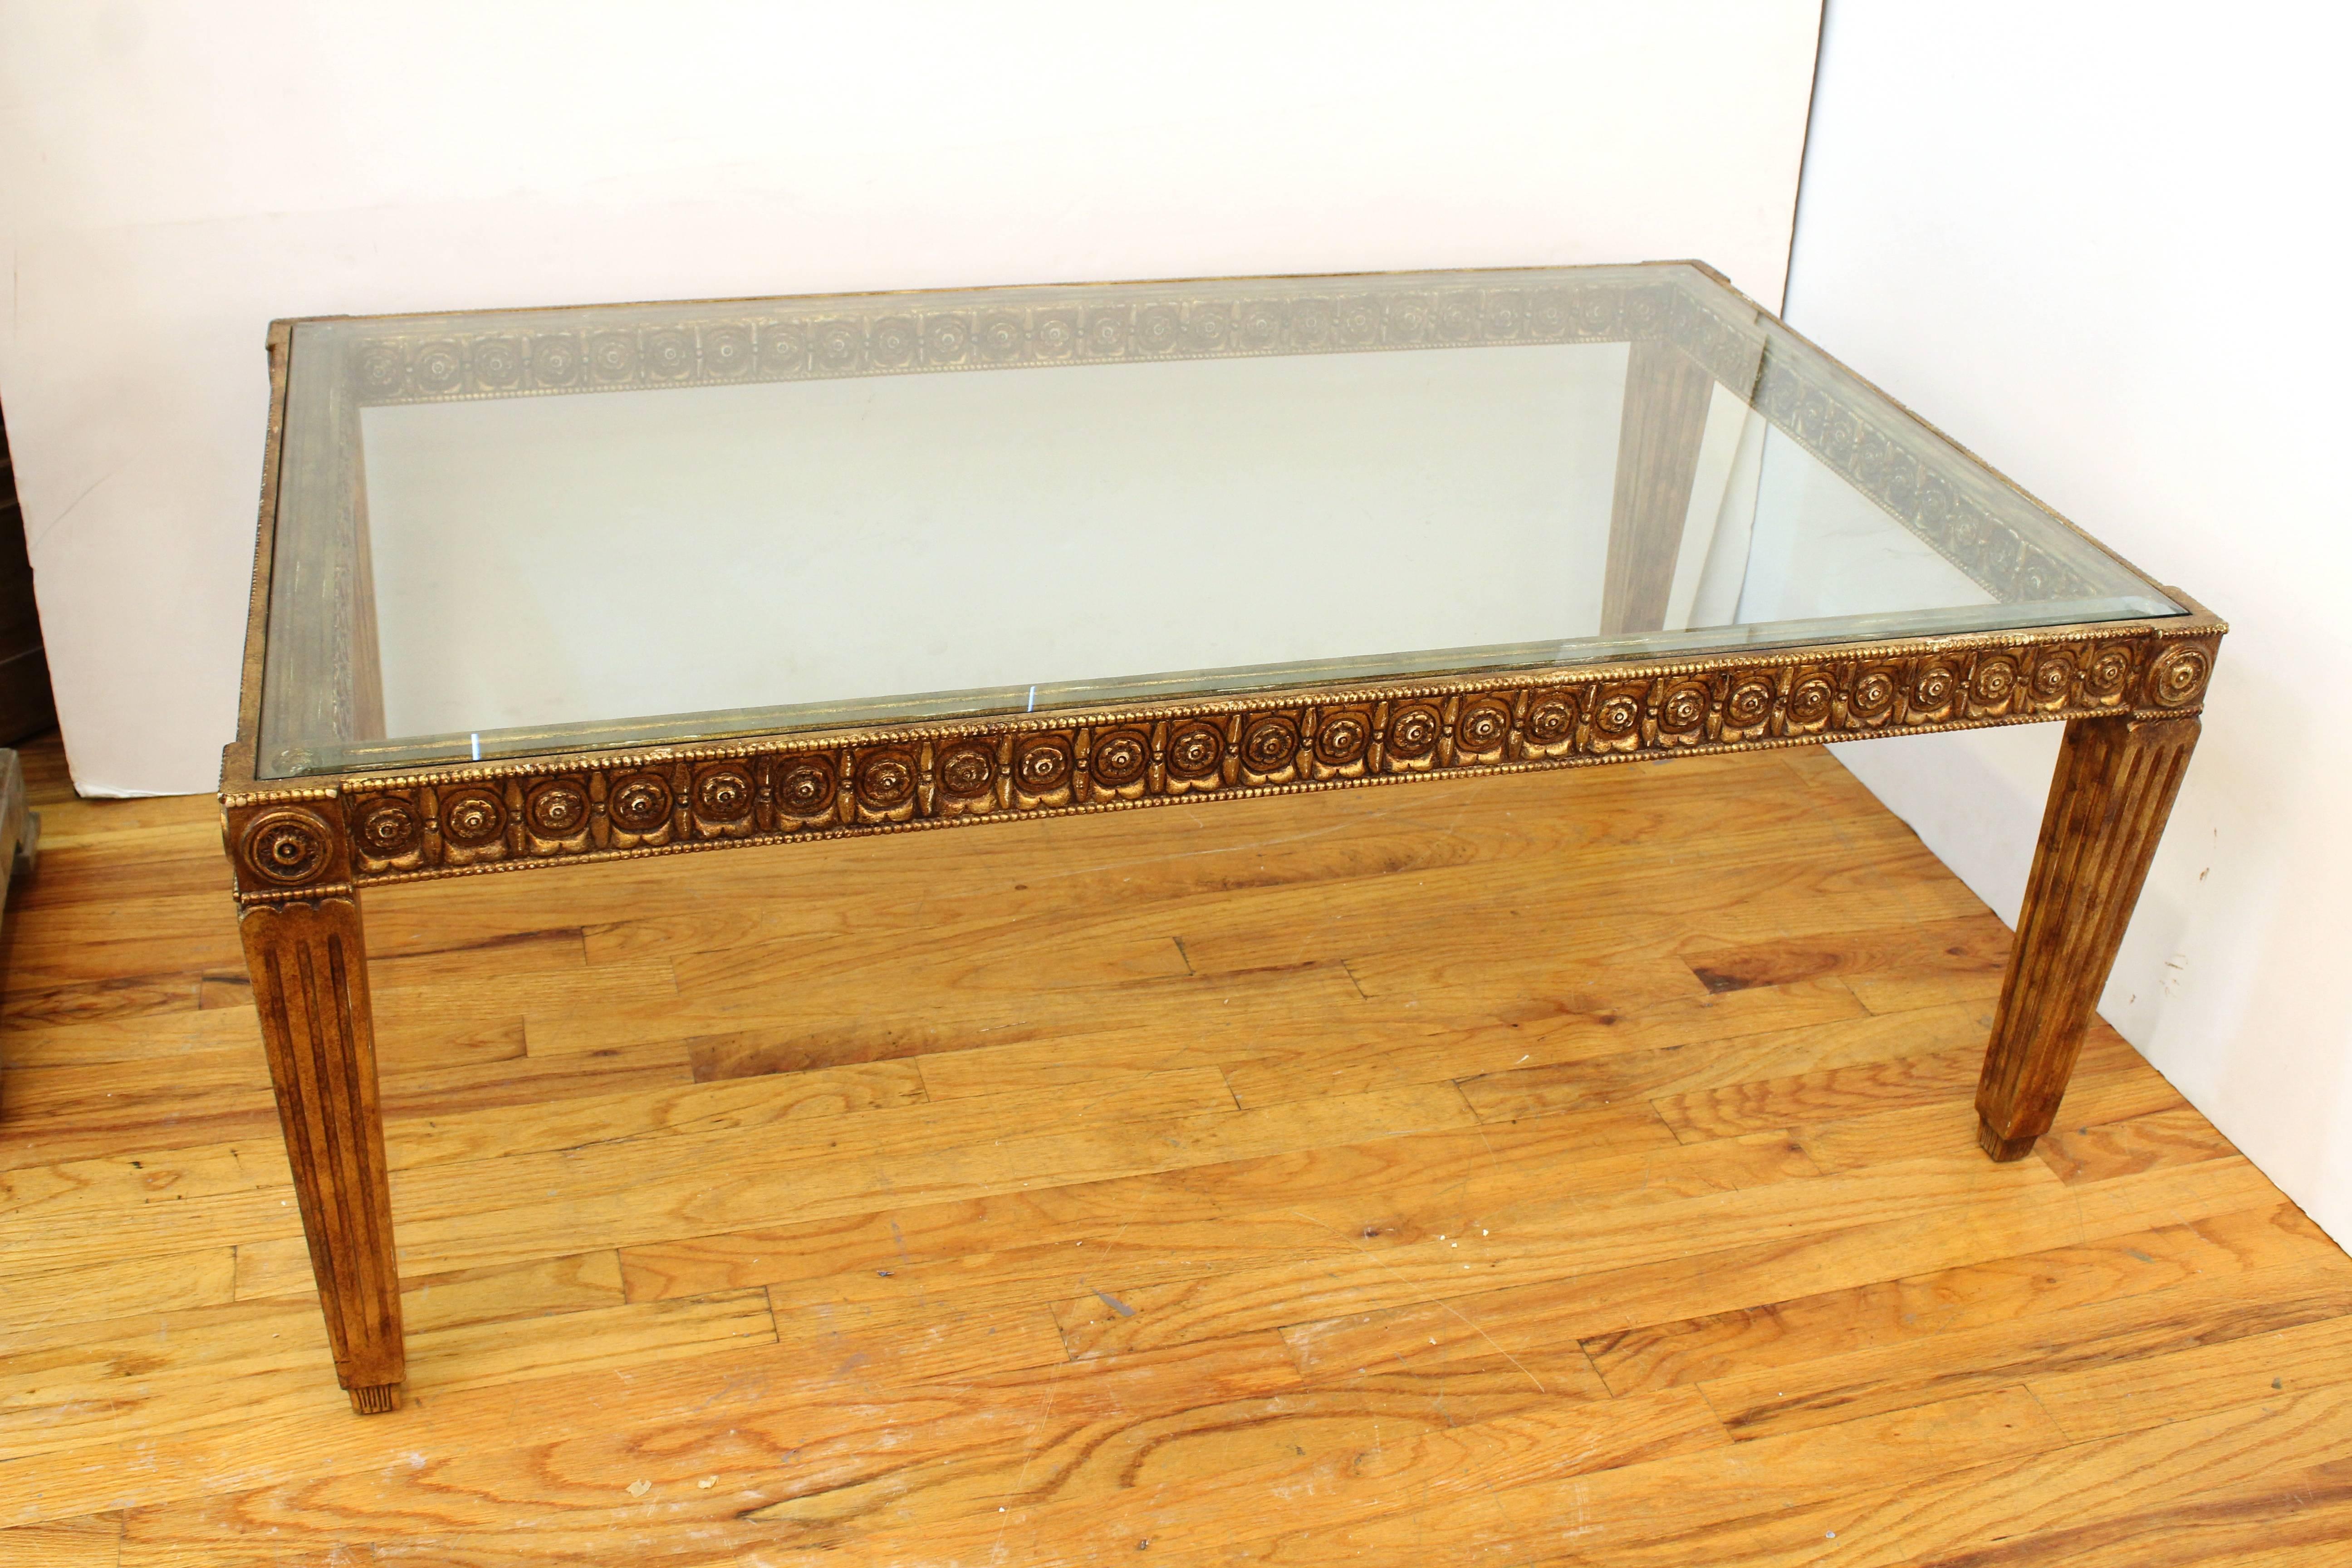 A giltwood coffee table with glass top dating from the 20th century but in a 19th century style. The table's frame is carved with beads and a rosette pattern on both the interior and exterior. The rectangular table stands on four column like legs.